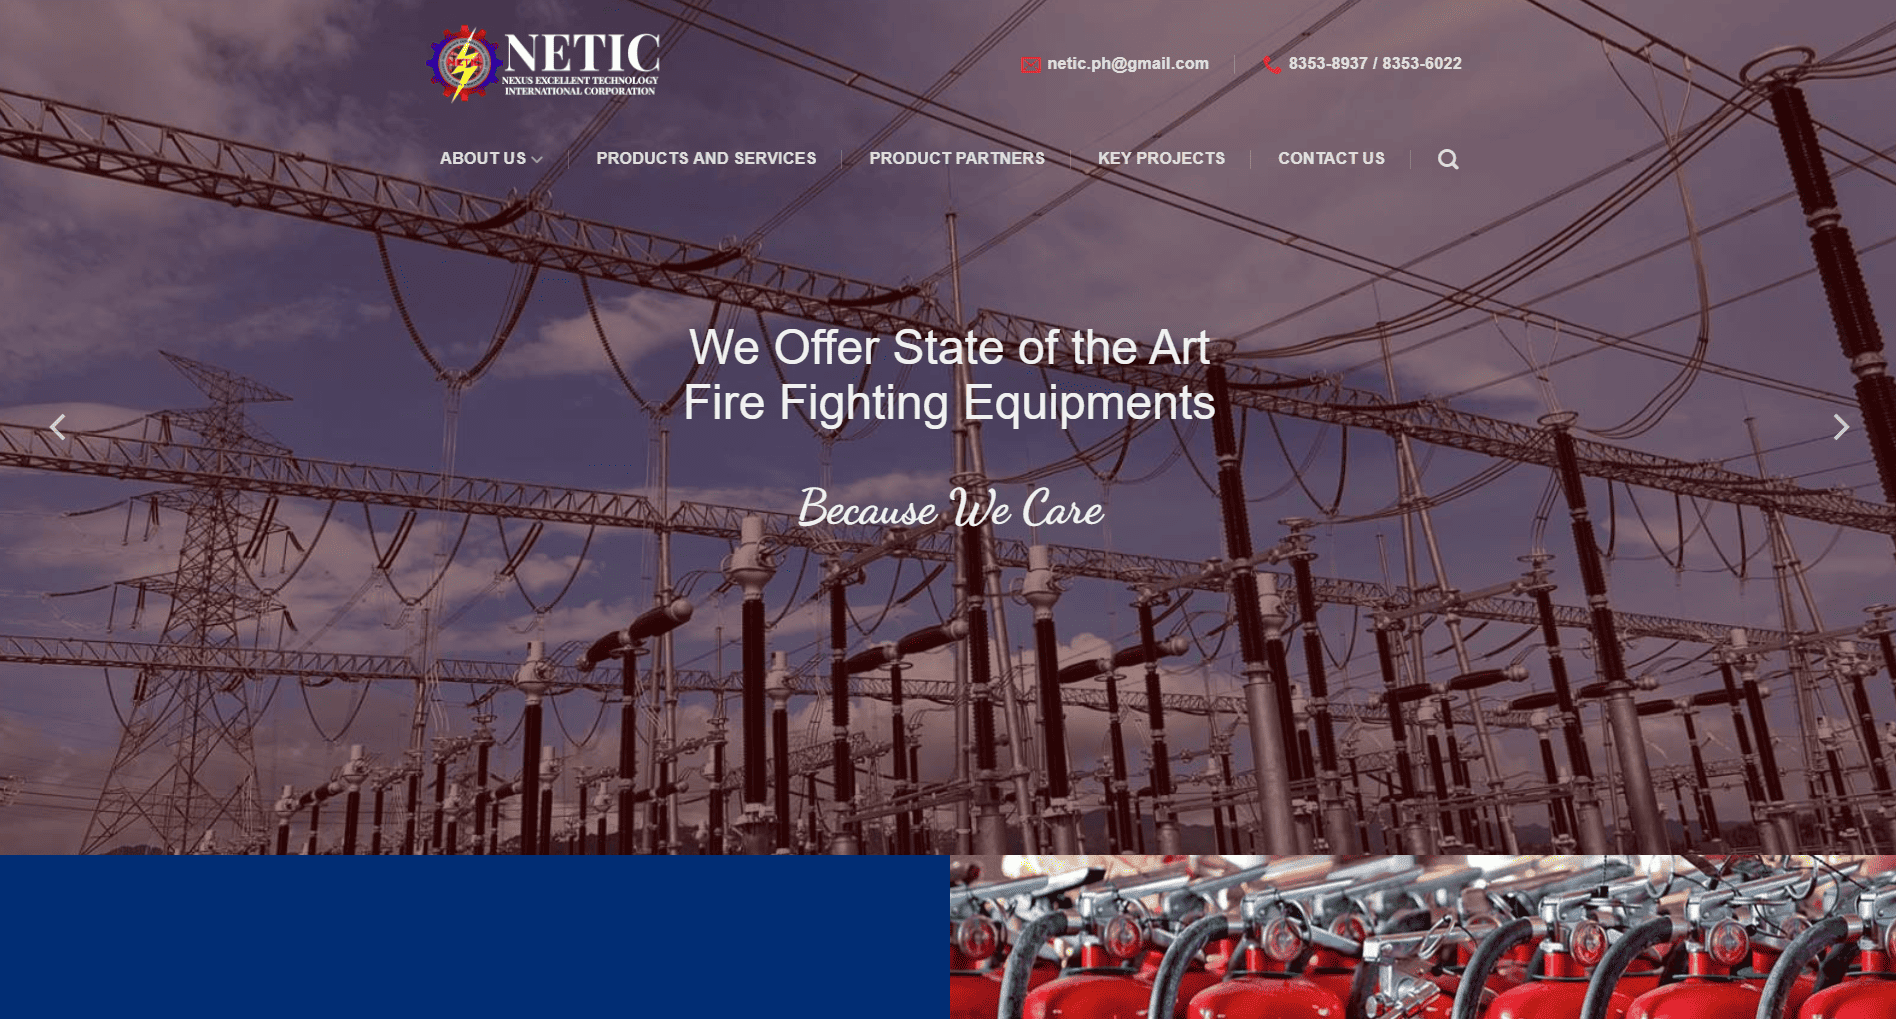 Featured image for “Netic”